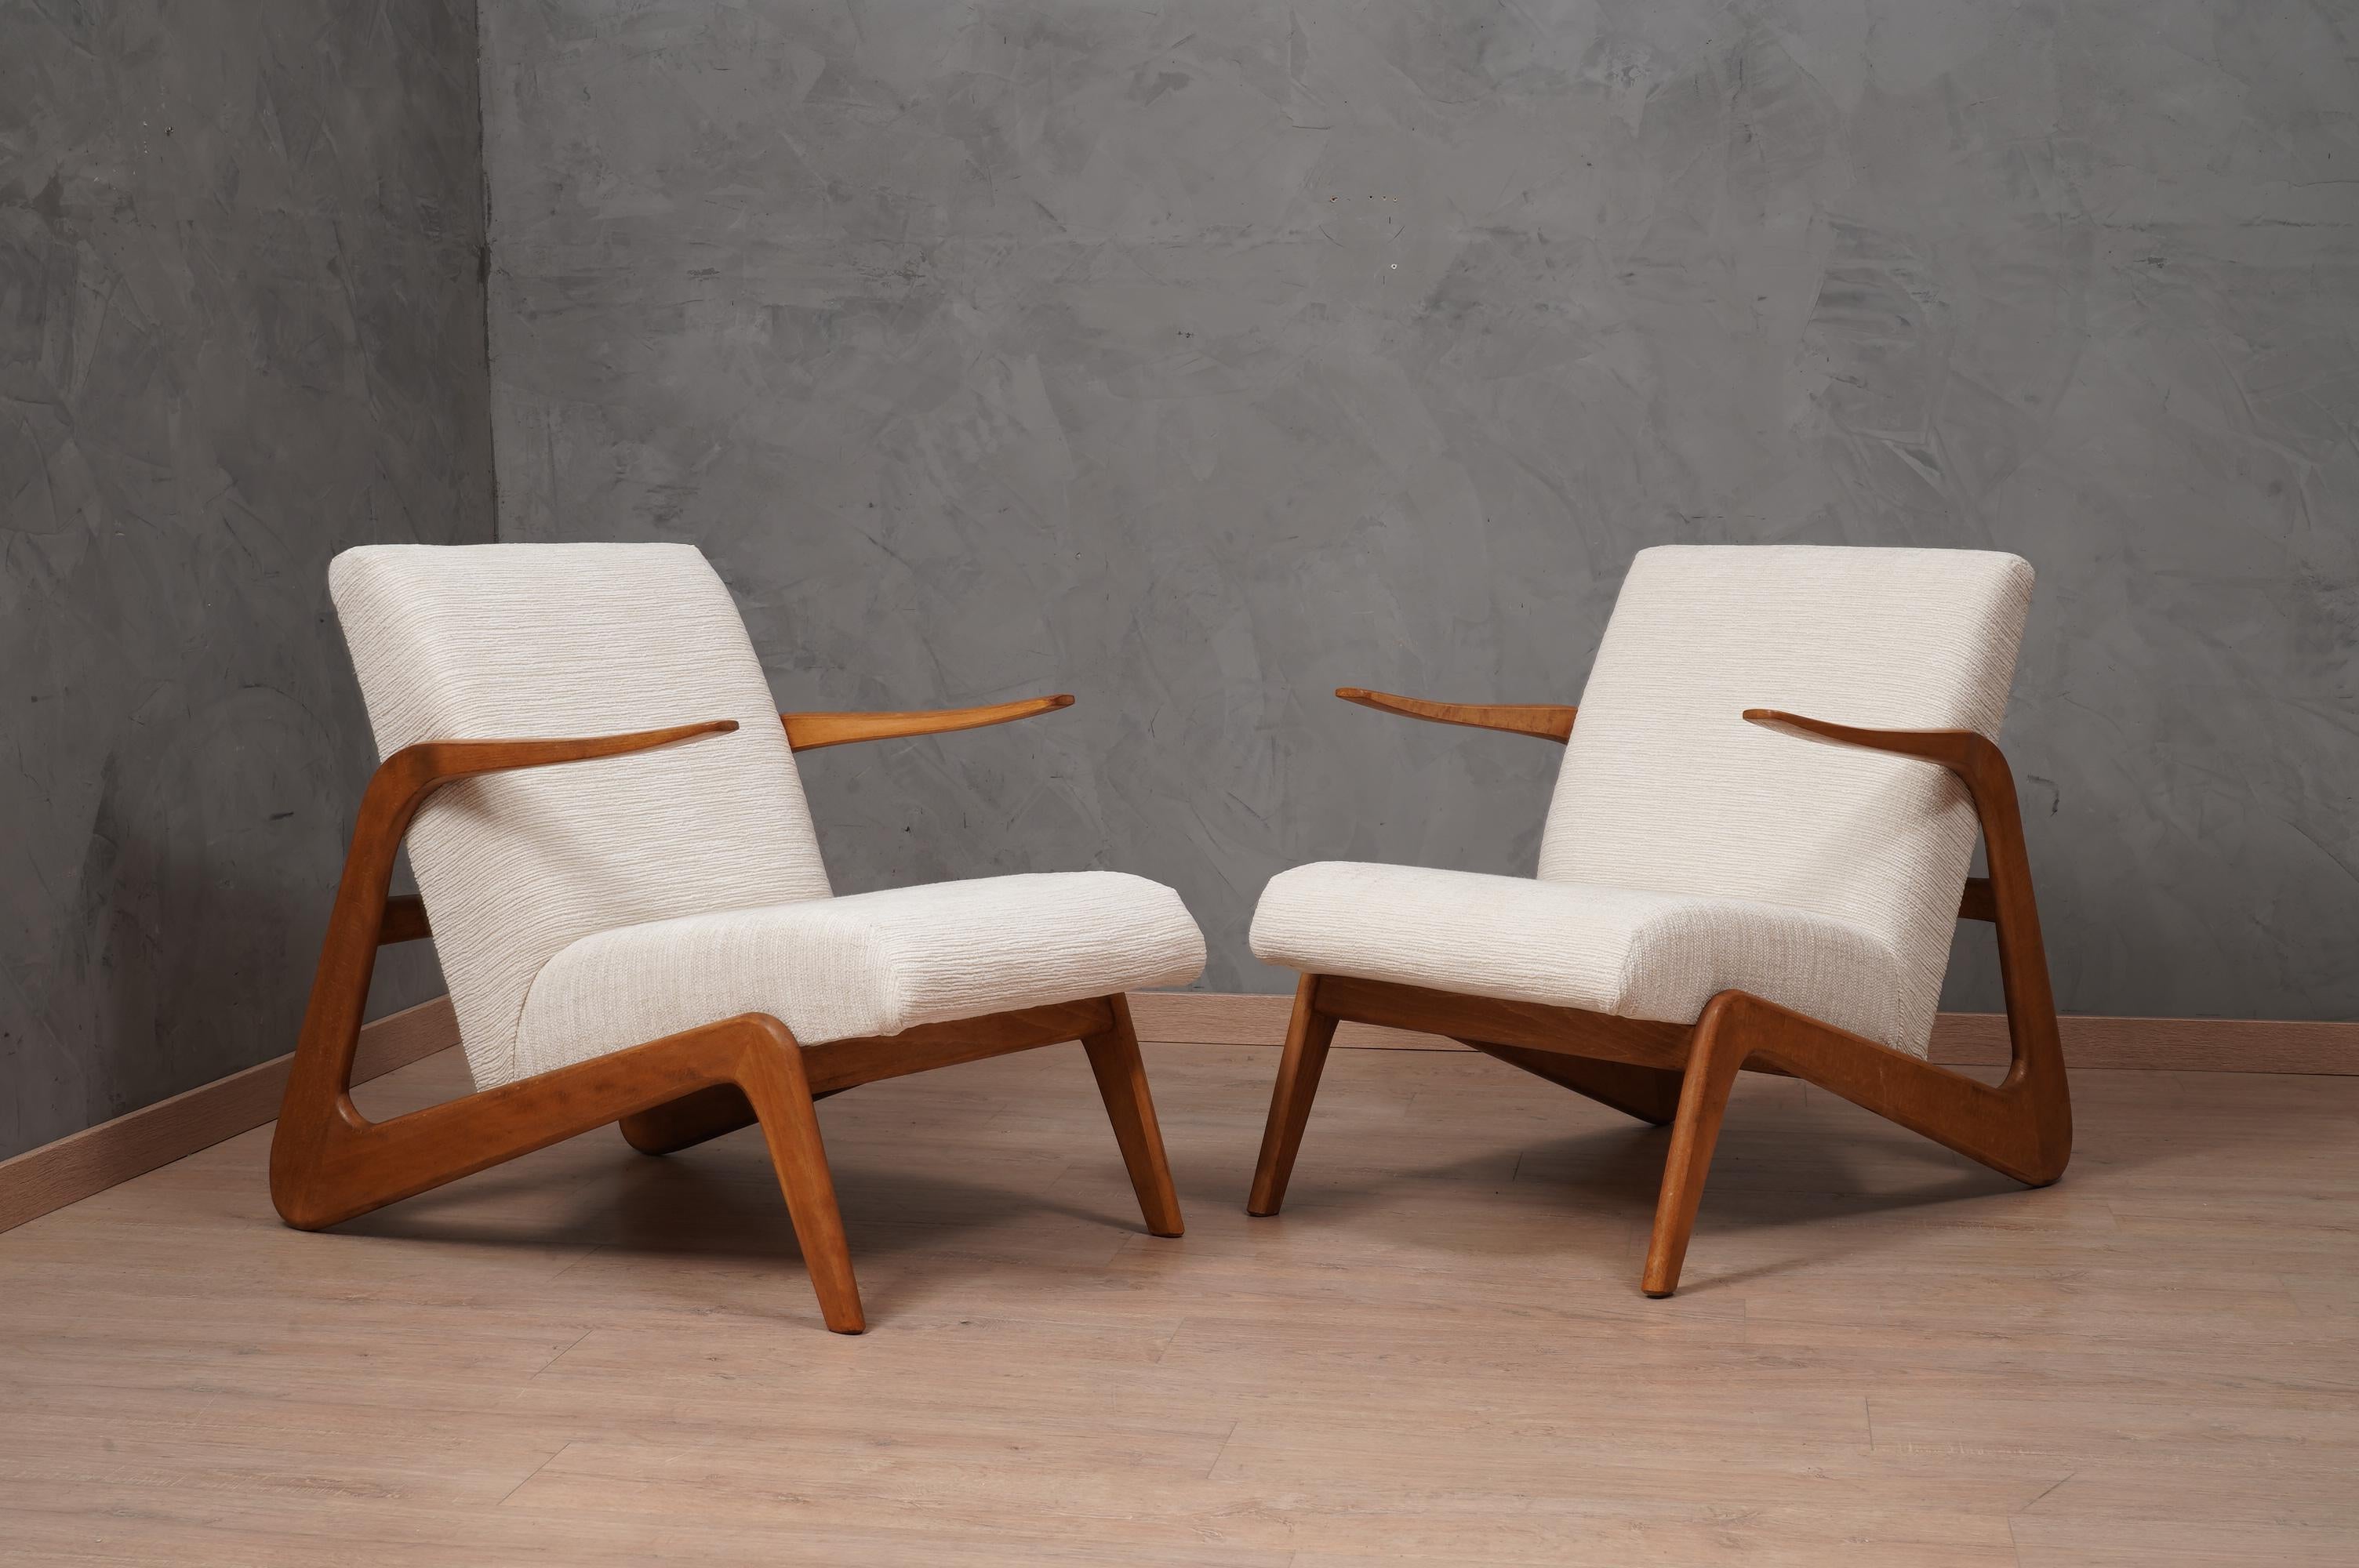 Original and enterprising design for the time, but very very seductive. The armchairs fascinate those who look at them and comfortably welcome those who sit on them.

The armchairs have a particular wooden structure that allows you to go down from